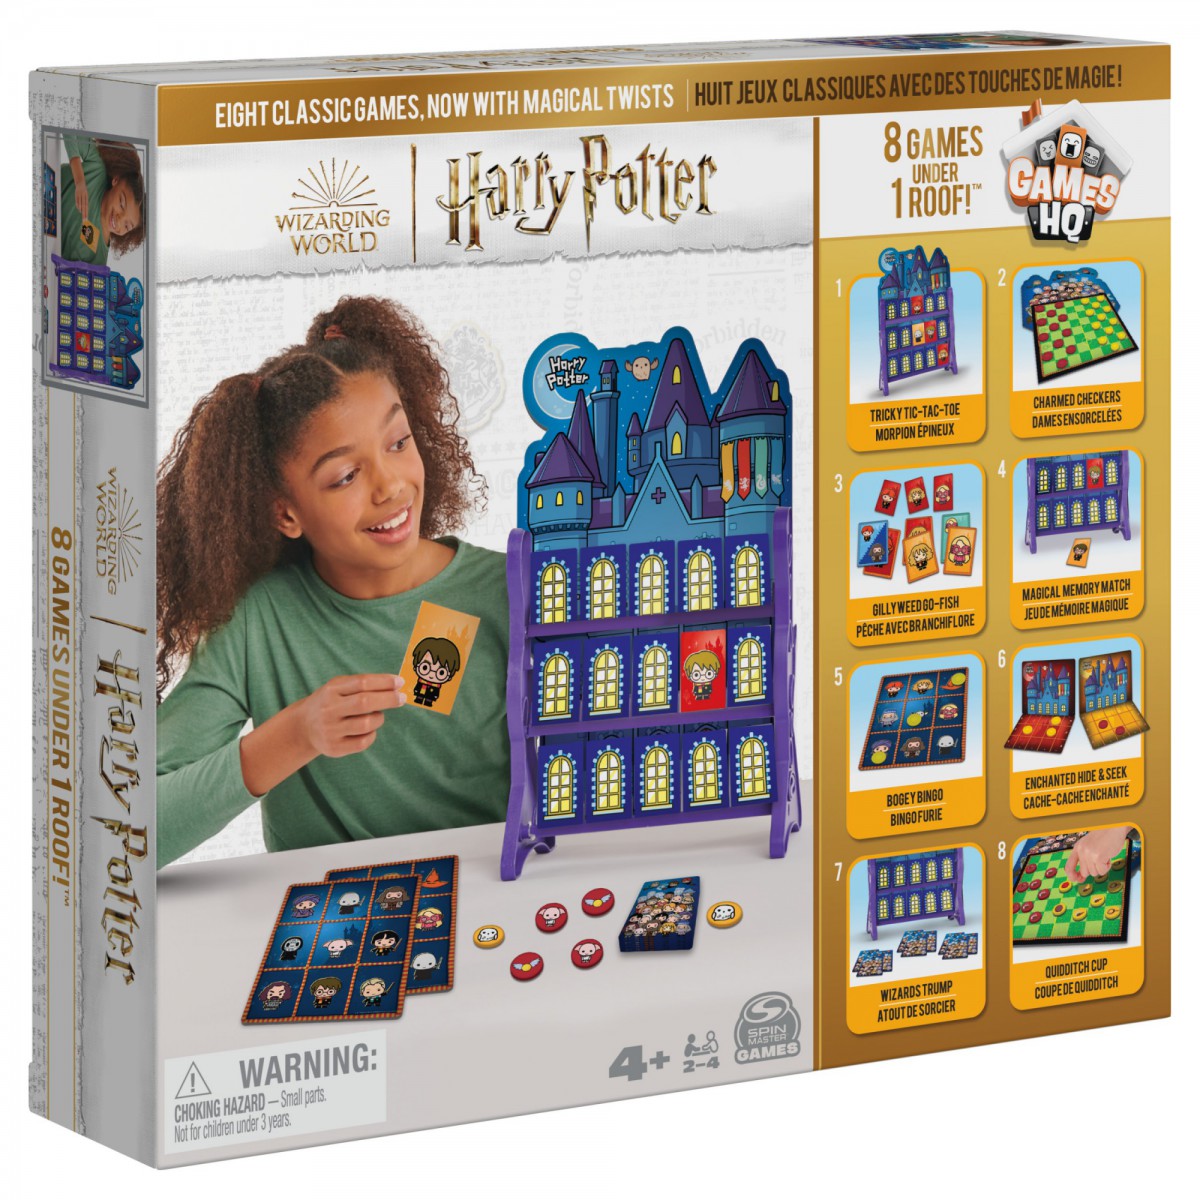 Wizard World - 8 Games Under 1 Roof - Harry Potter